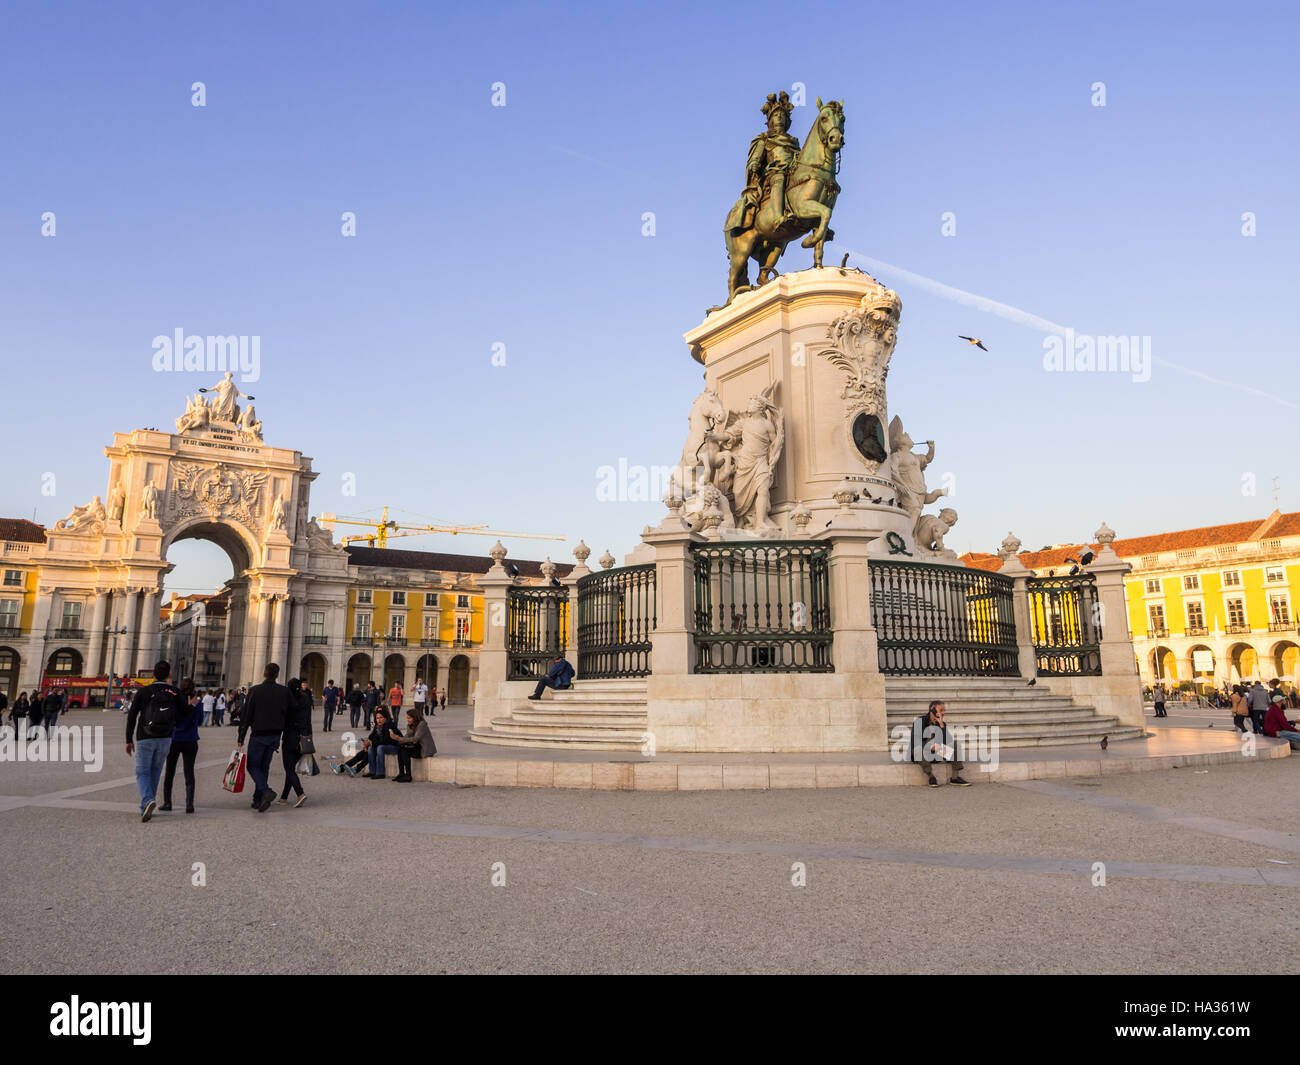 Praca do Comercio with the statue of King Jose I in downtown of Lisbon, Portugal, at sunset. Stock Photo